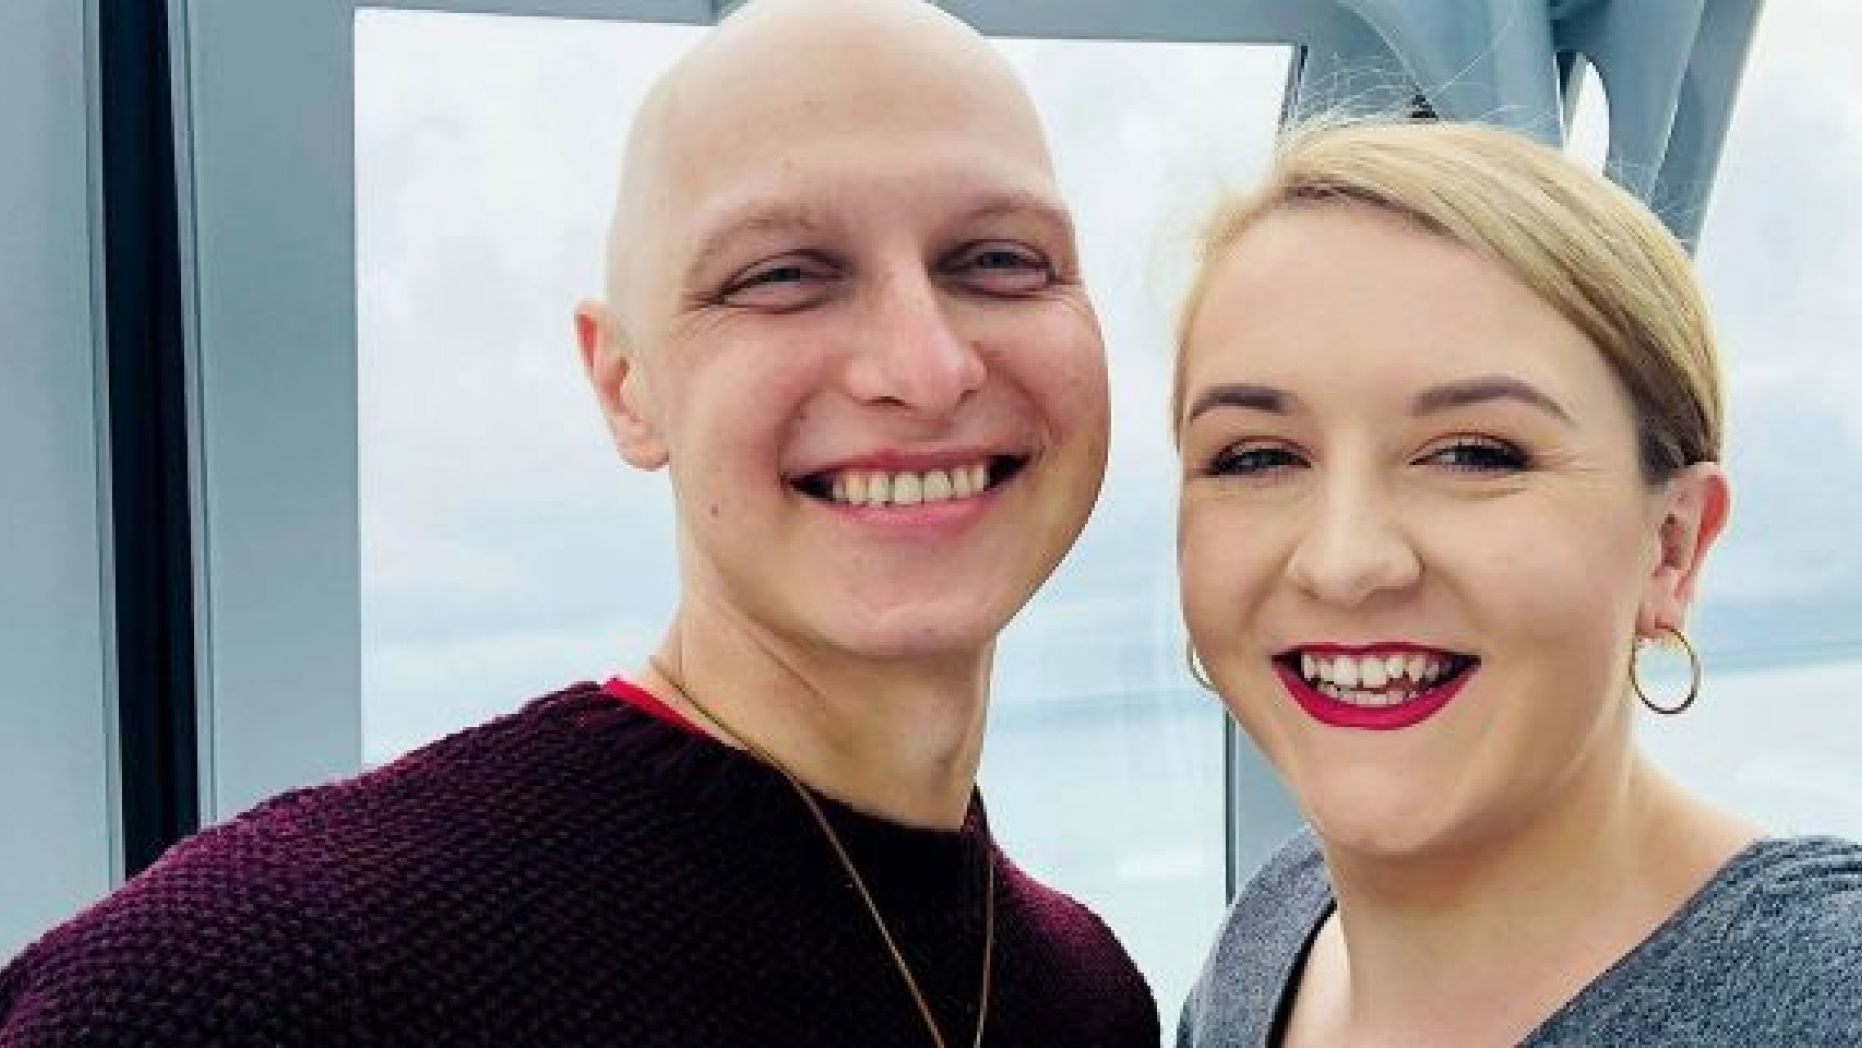 Martins Kokins, 29, learned that his cancer returned in June, and was given just six months to live. After exceeding the doctor's expectations, the couple isn't sure how much time he has left. 